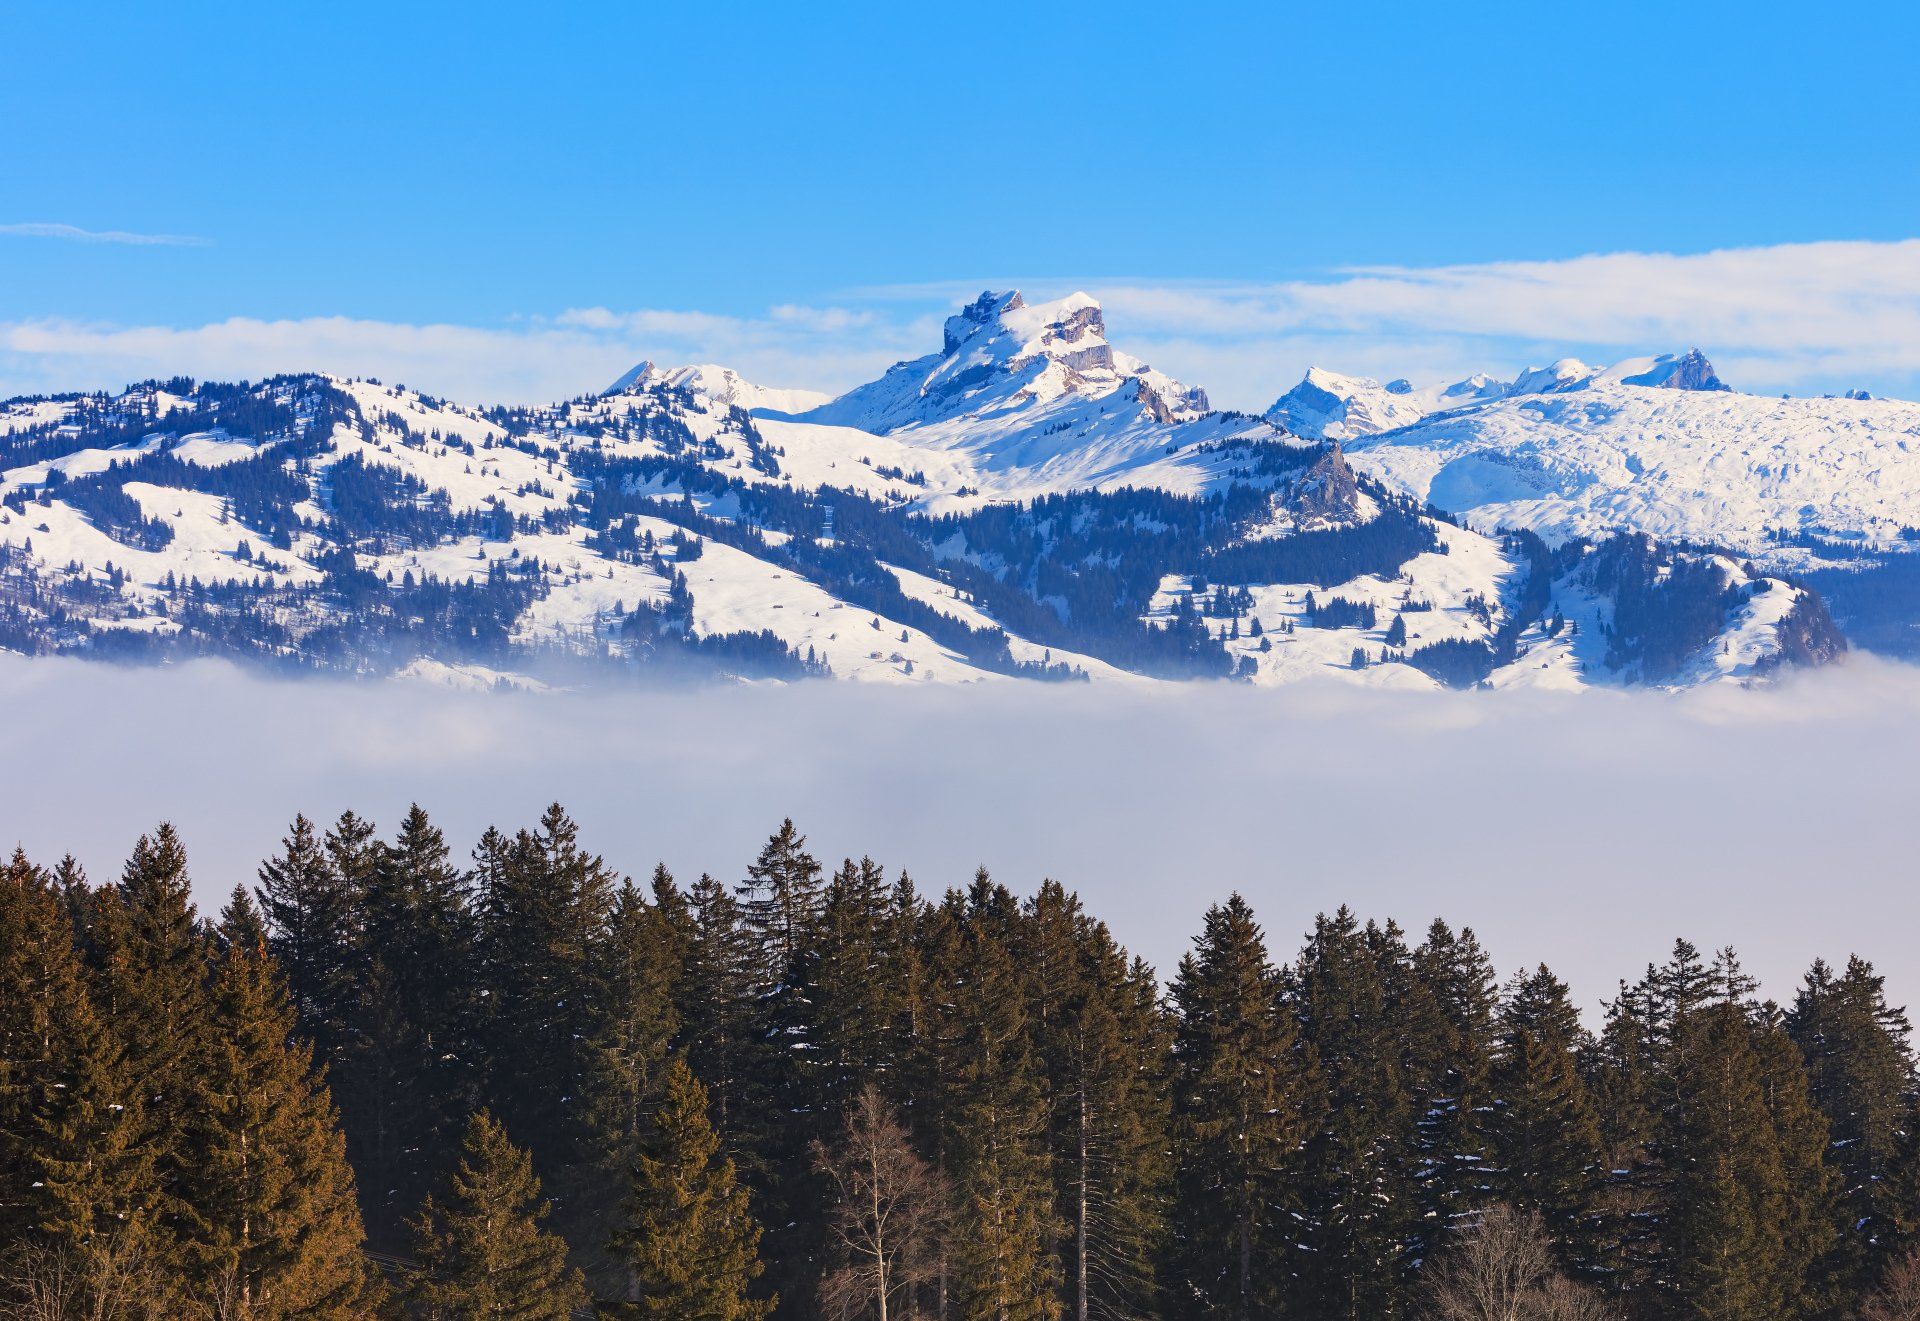 A snowy mountain range with trees in the foreground